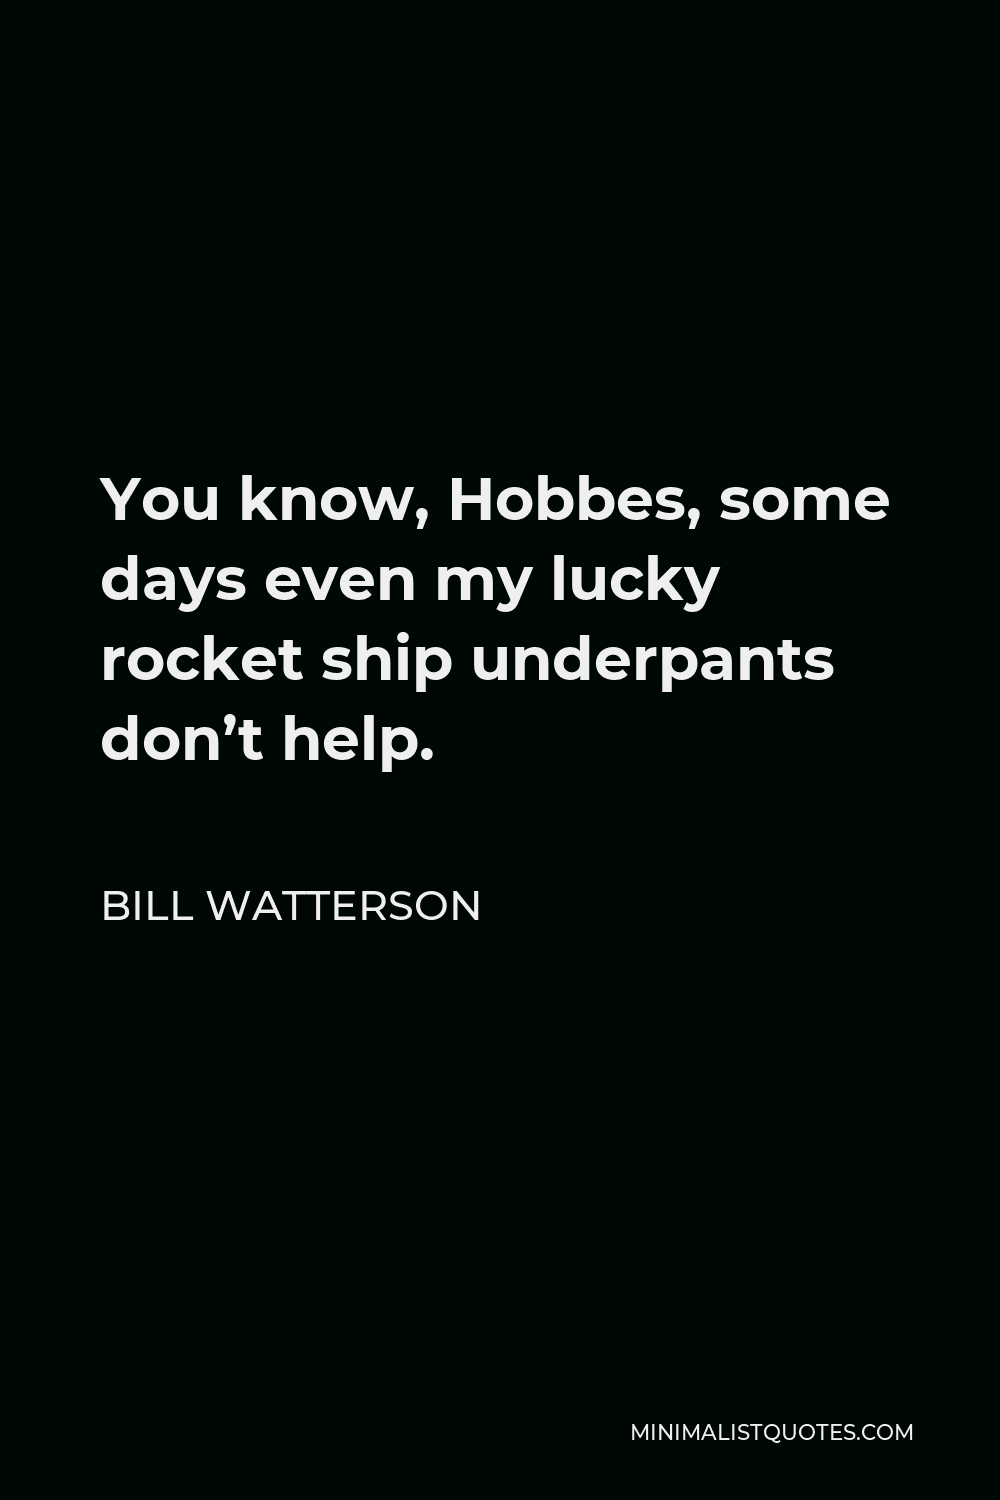 Bill Watterson Quote - You know, Hobbes, some days even my lucky rocket ship underpants don’t help.